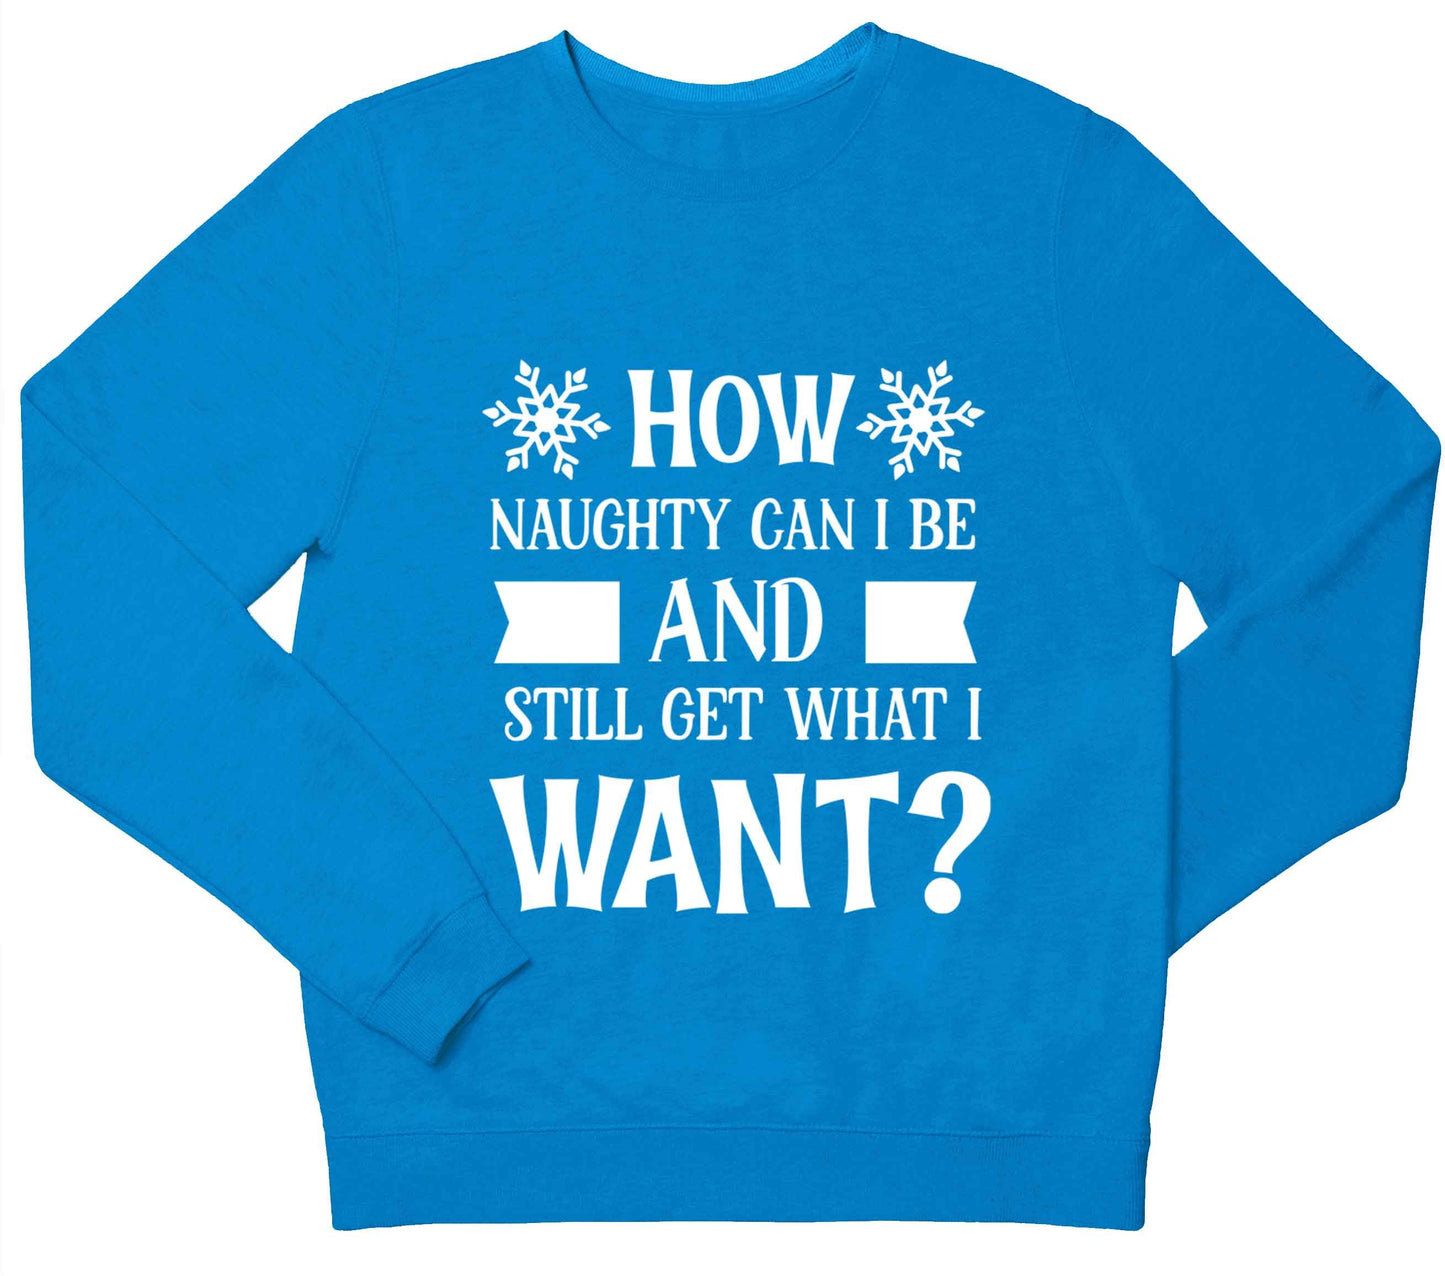 How naughty can I be and still get what I want? children's blue sweater 12-13 Years